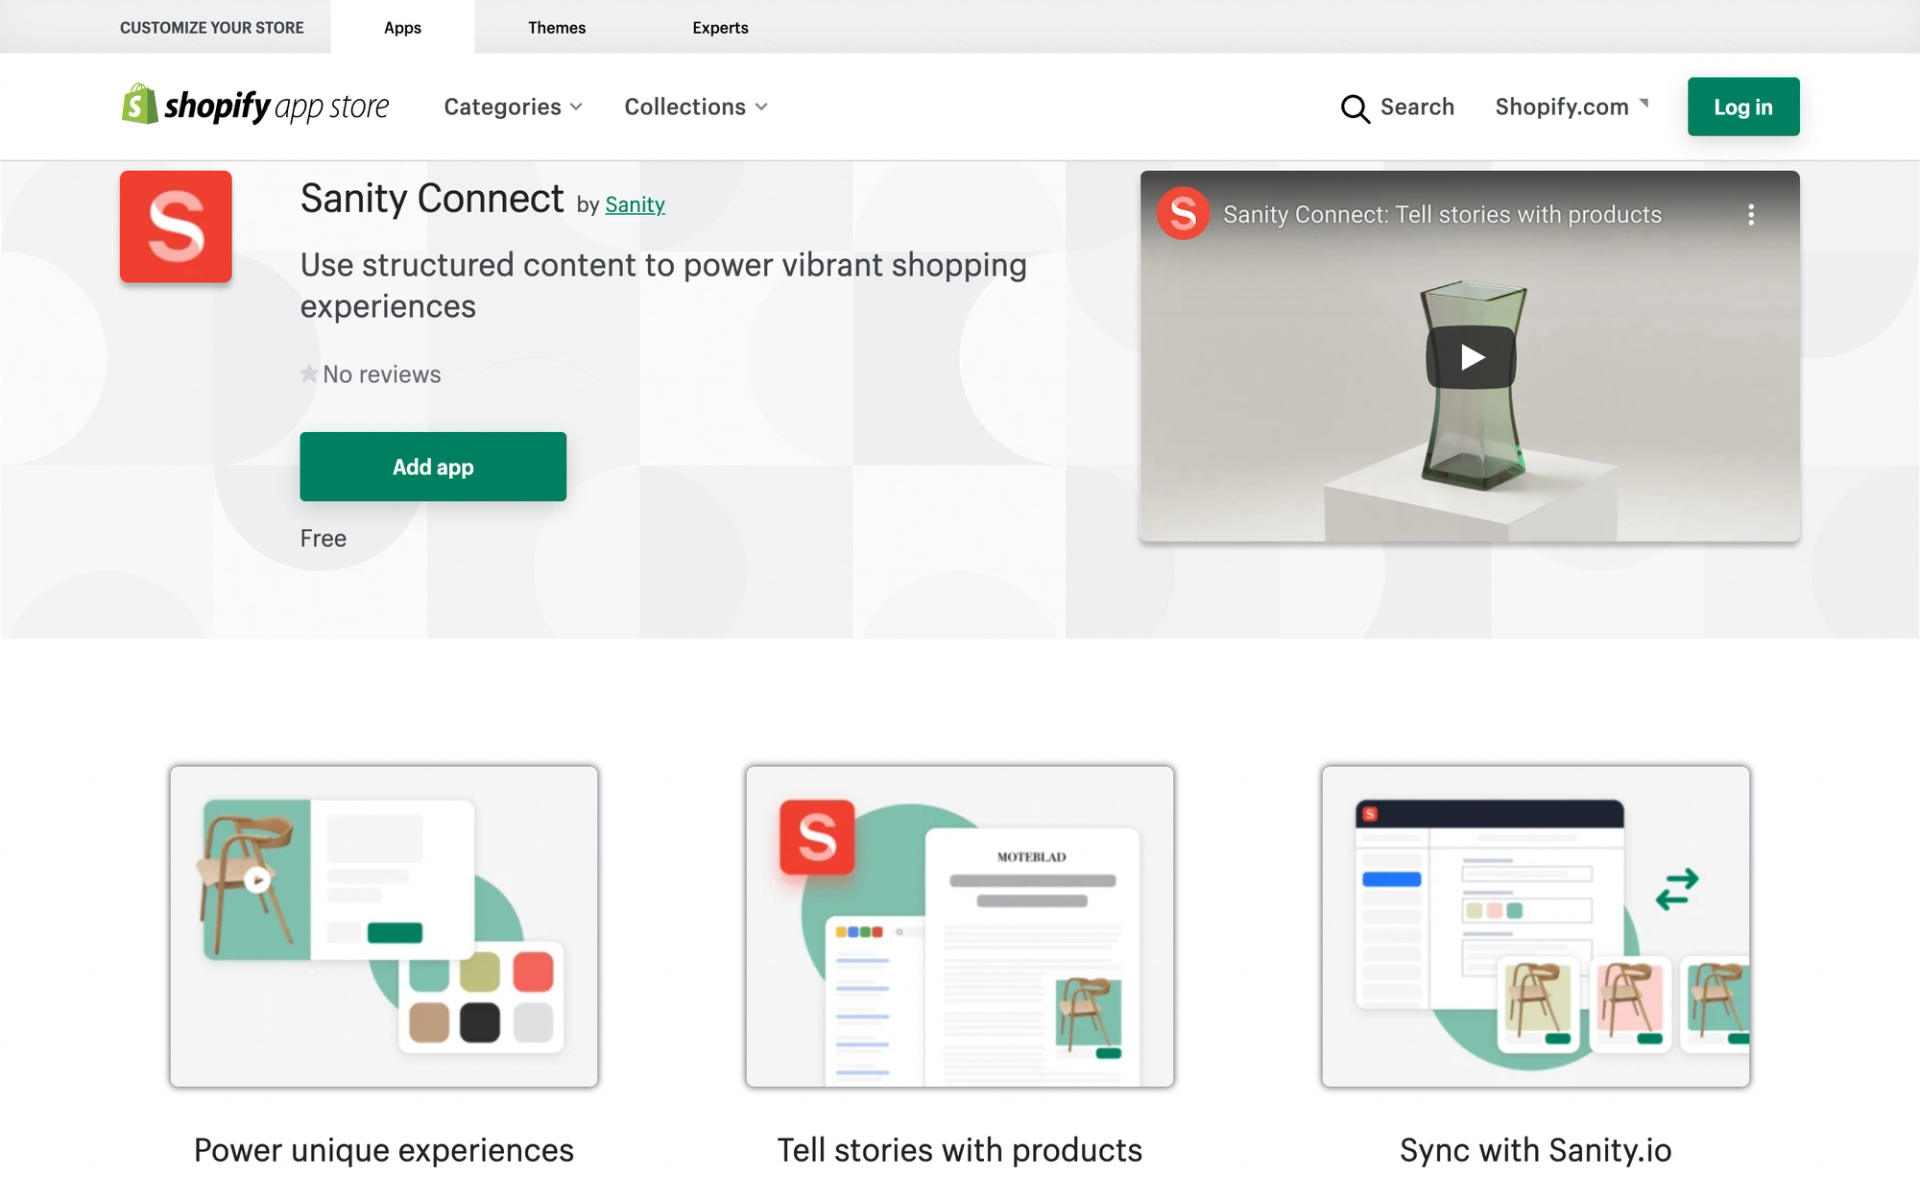 Screenshot of Sanity Connect App in Shopify app store